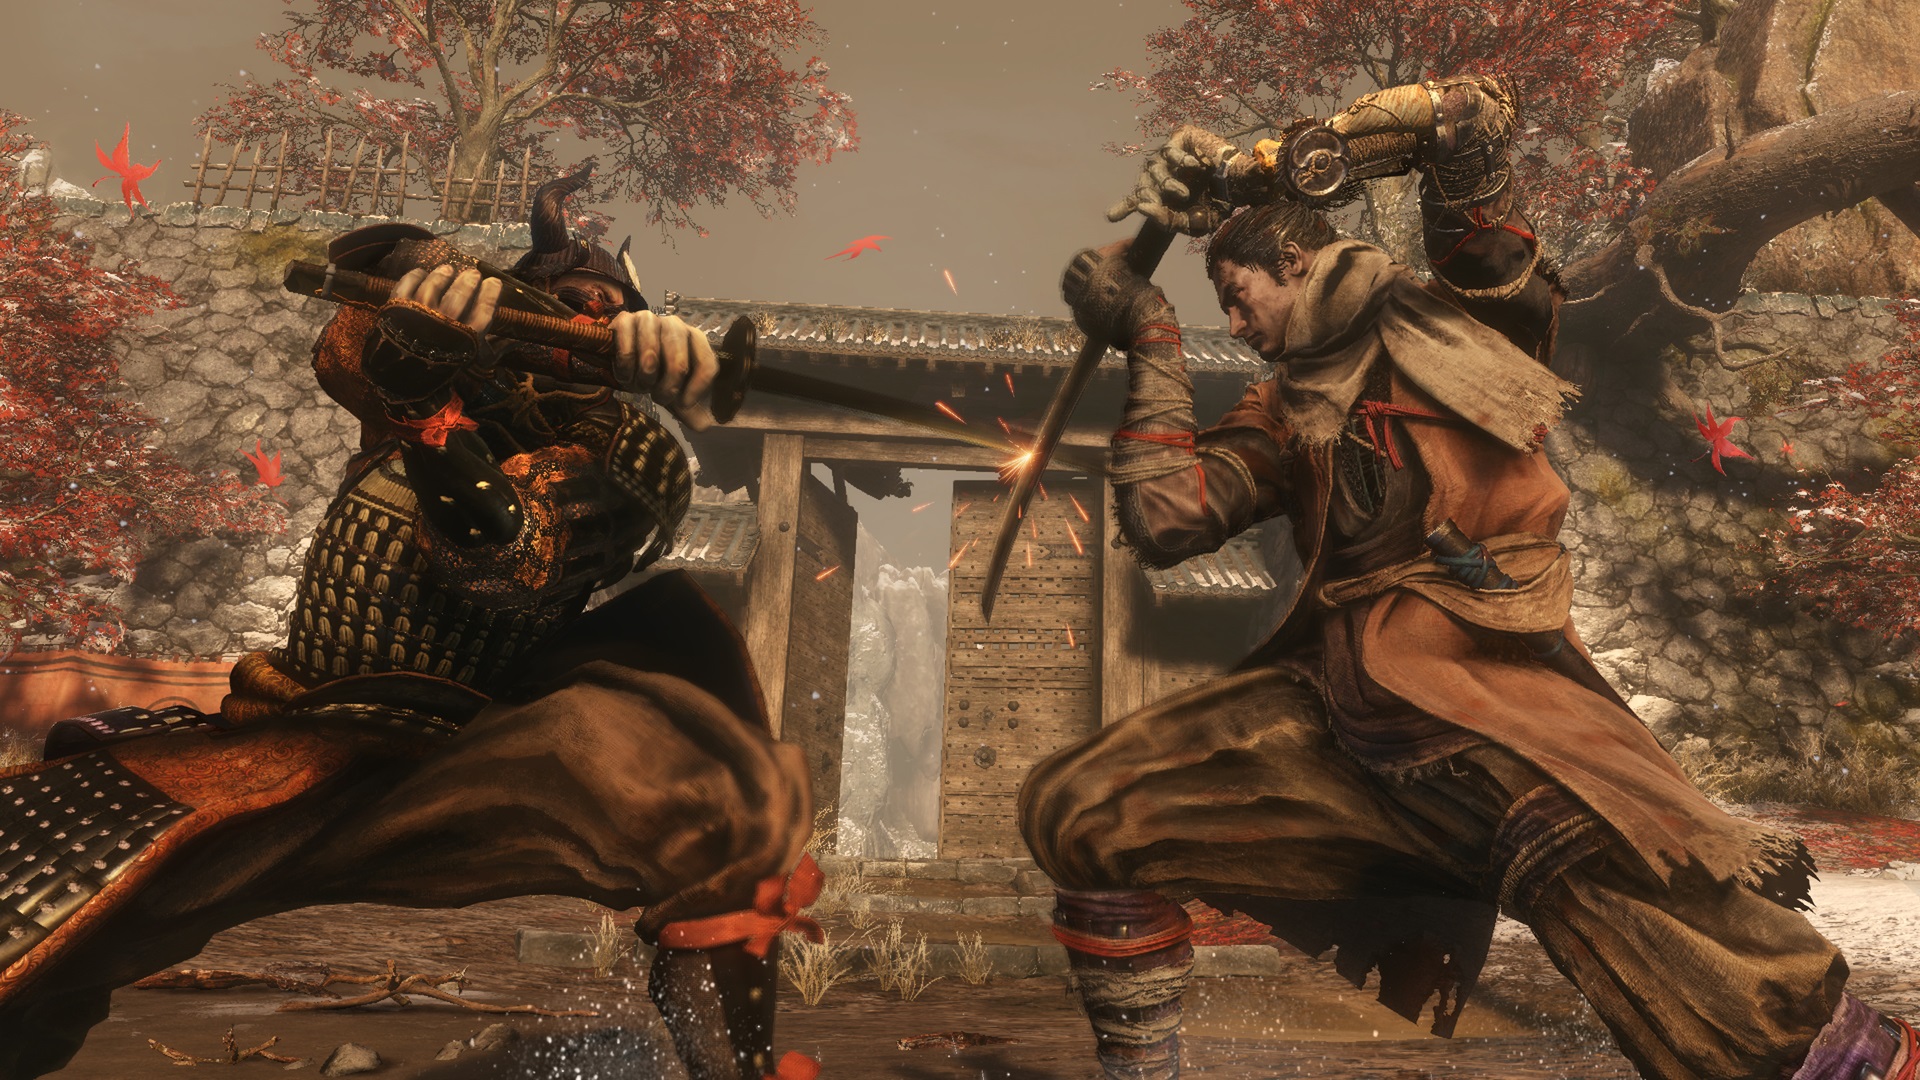 Gameplay Overview Trailer for Sekiro: Shadows Die Twice